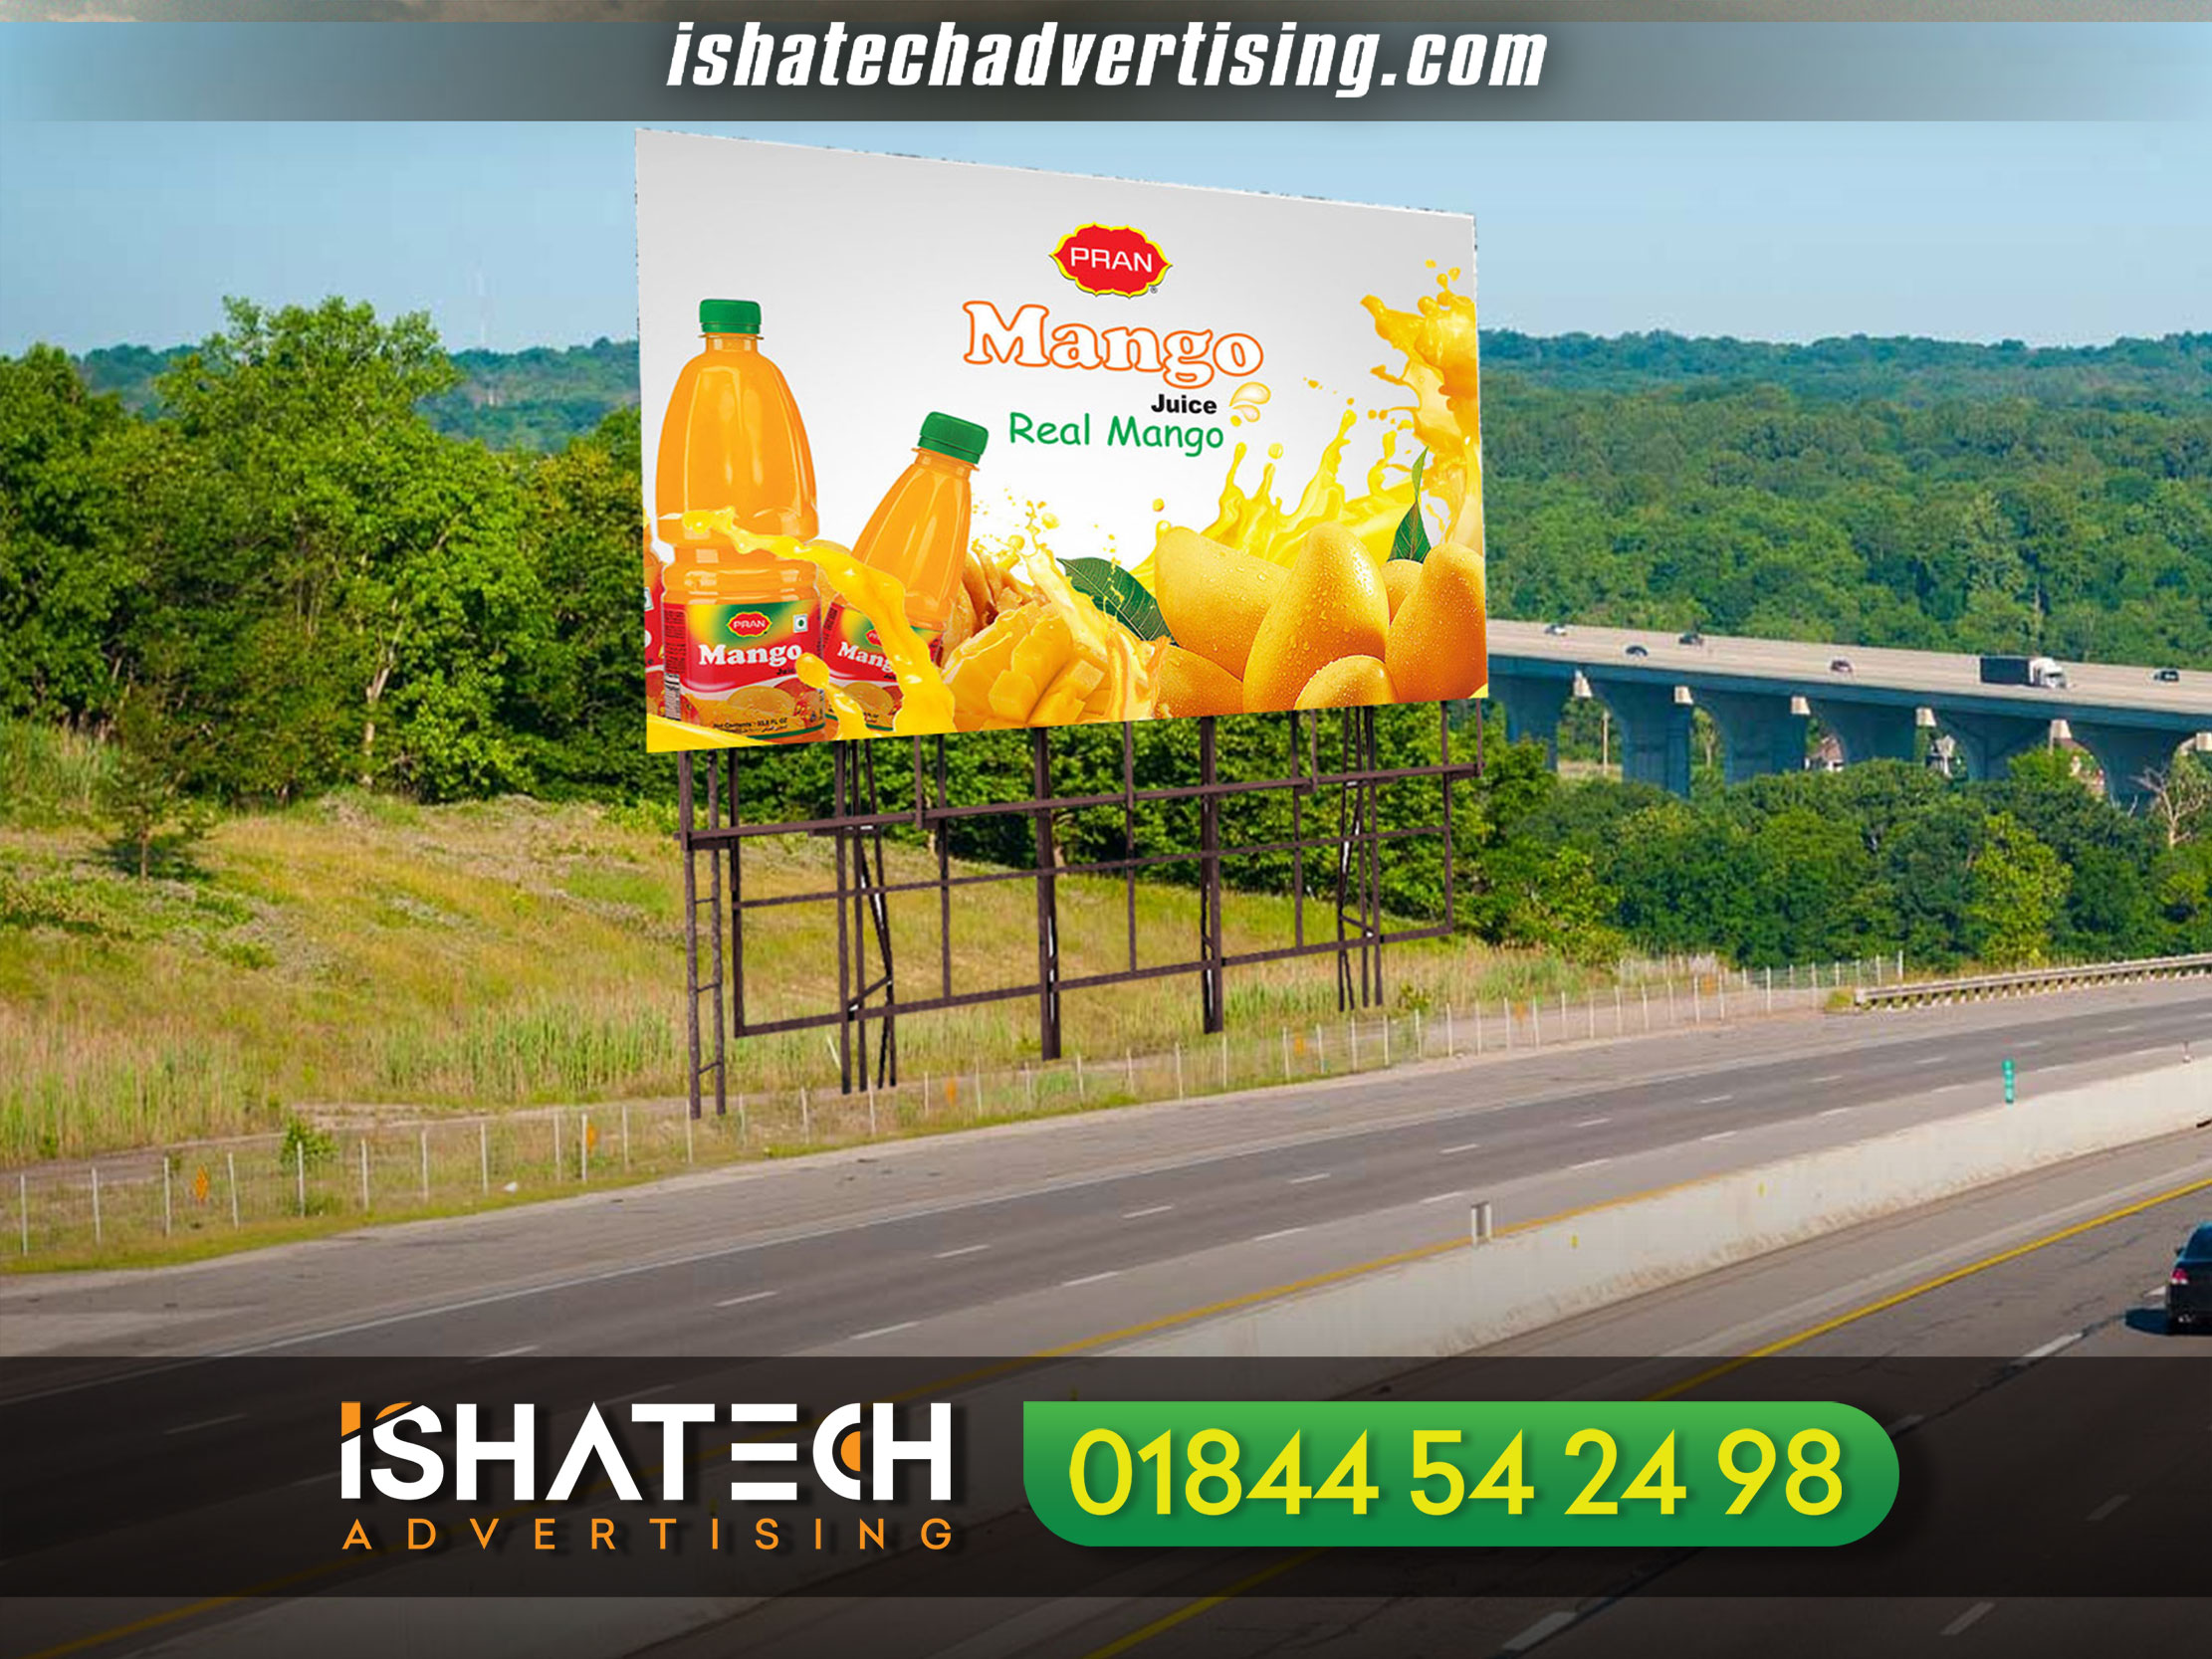 Premier Cement Billboard Design, Real Estate Billboard, Project Billboard Advertising Steel Billboard Structure Steel Board Outdoor Signage, All Kind of #DigitalPrint Pana, PVC, Shop Sign, Name Plate, #Lighting Sign Board, #LEDSign, Neon Sign, Acrylic Sign, Moving Display, #Billboard, Radio Ad, #NewspaperAd, TV Ad, #FairStall & Event #Management Ad Etc. Hope You’re Interest! #neonsign #signboard #eventmanagement #signage #stall #digitalprint #sign #display #board #acrylic #neon #plate #ledsign #lighting #printing #graphicdesign #service #marketing #ad #branding #print #advertising #BillBoard #DigitalBoard #SteelBoard #LocalBoard #StandBoardNonlitBoard #Structure #Structural. top billboard advertising agency in dhaka bangladesh. top 10 billboard advertising agency in dhaka bangladesh. list of billboard advertising agency in dhaka bangladesh. billboard advertising agency in dhaka bangladesh price. best billboard advertising agency in dhaka bangladesh. billboard advertising cost in bangladesh. billboard advertising bd. billboard rent in dhaka. real estate billboard, project billboard making in Dhaka Bangladesh, Besl Led Billboard Making Company in Dhaka Bangladesh.